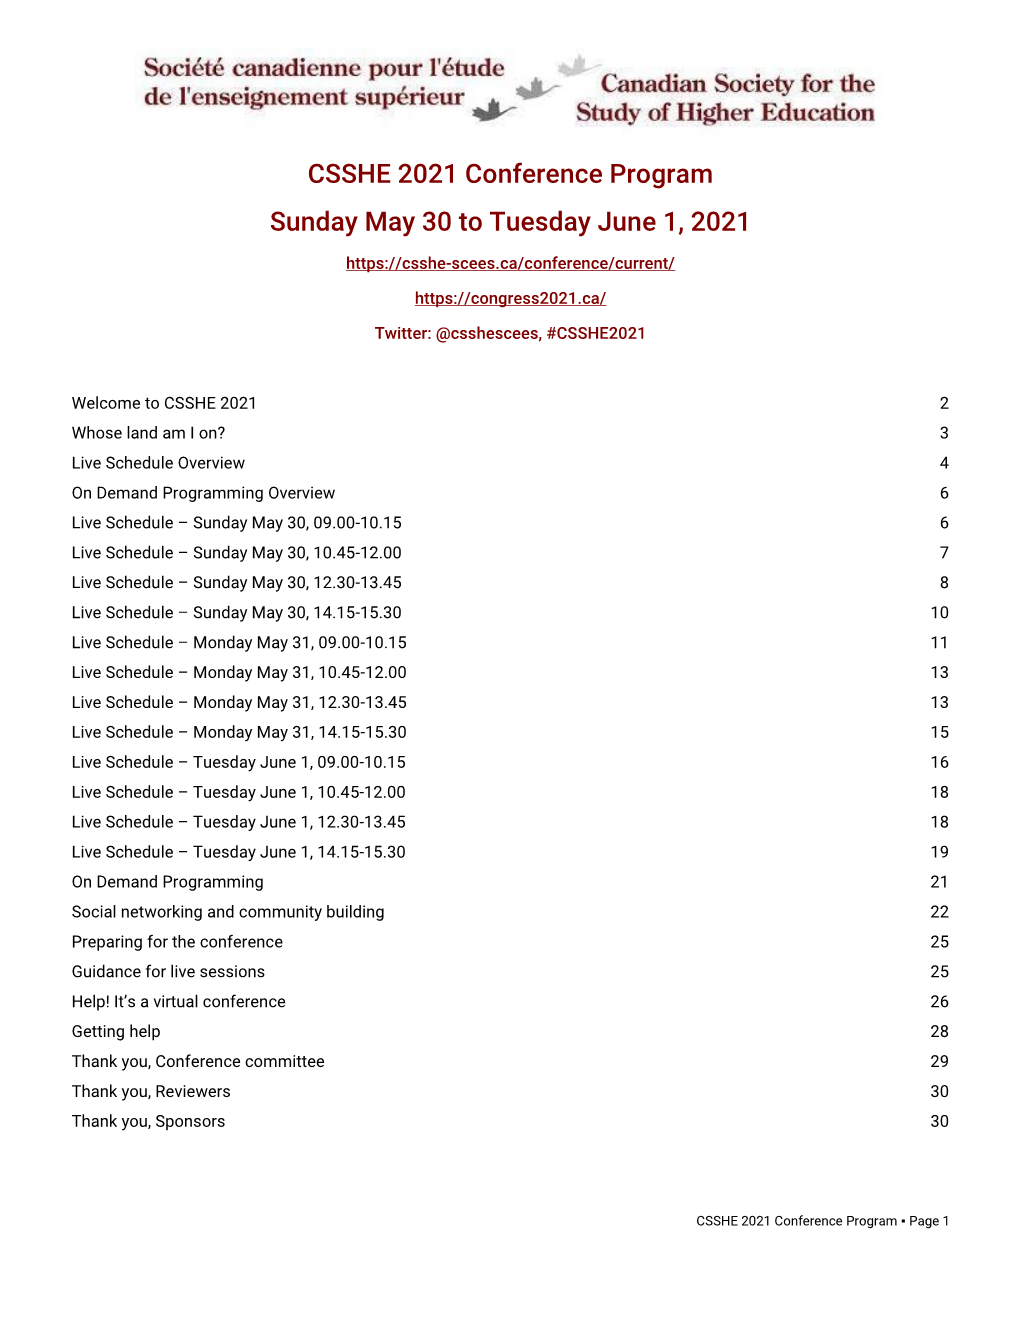 CSSHE 2021 Conference Program Sunday May 30 to Tuesday June 1, 2021